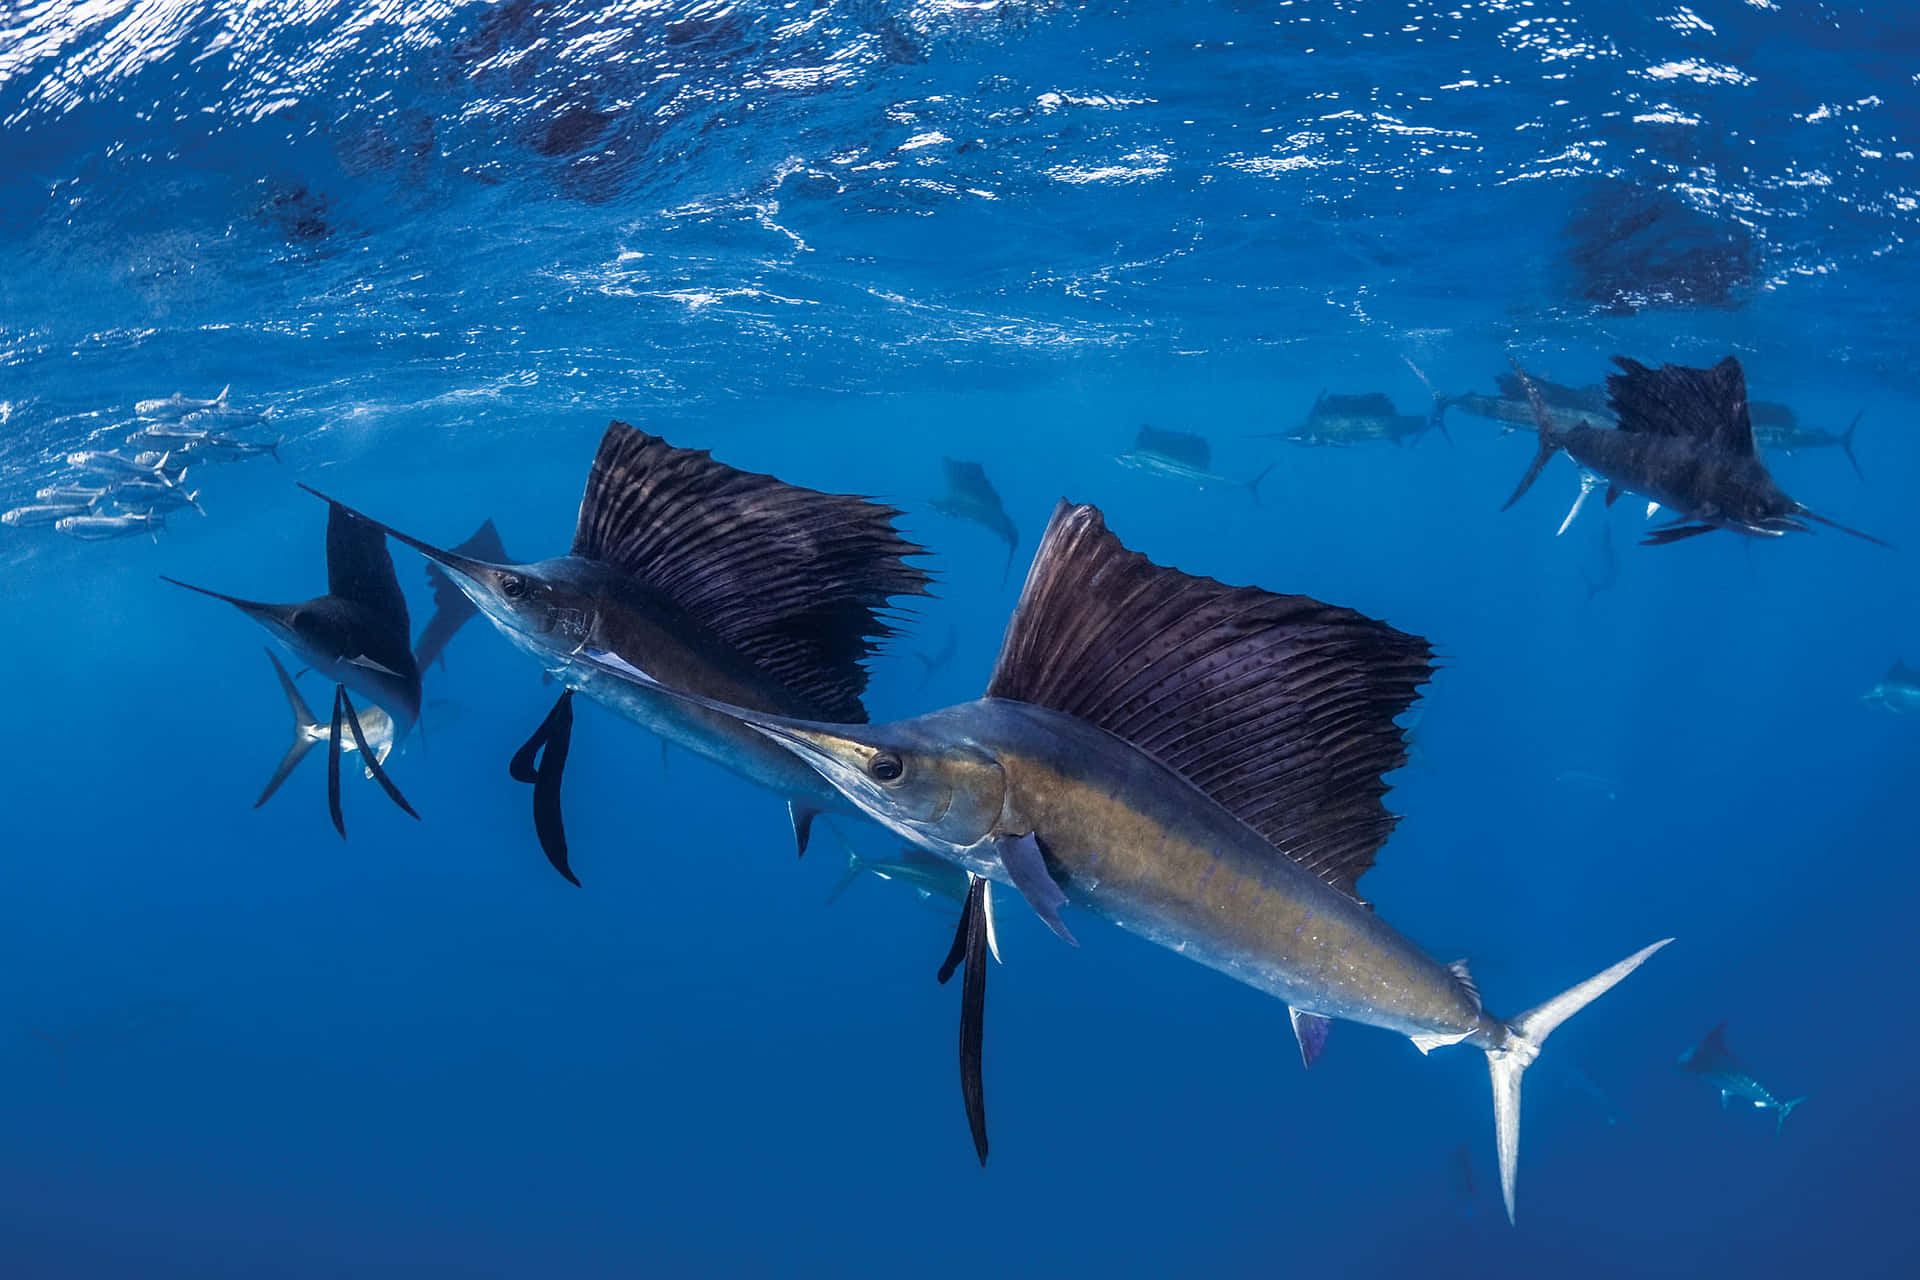 The agility and beauty of the Sailfish